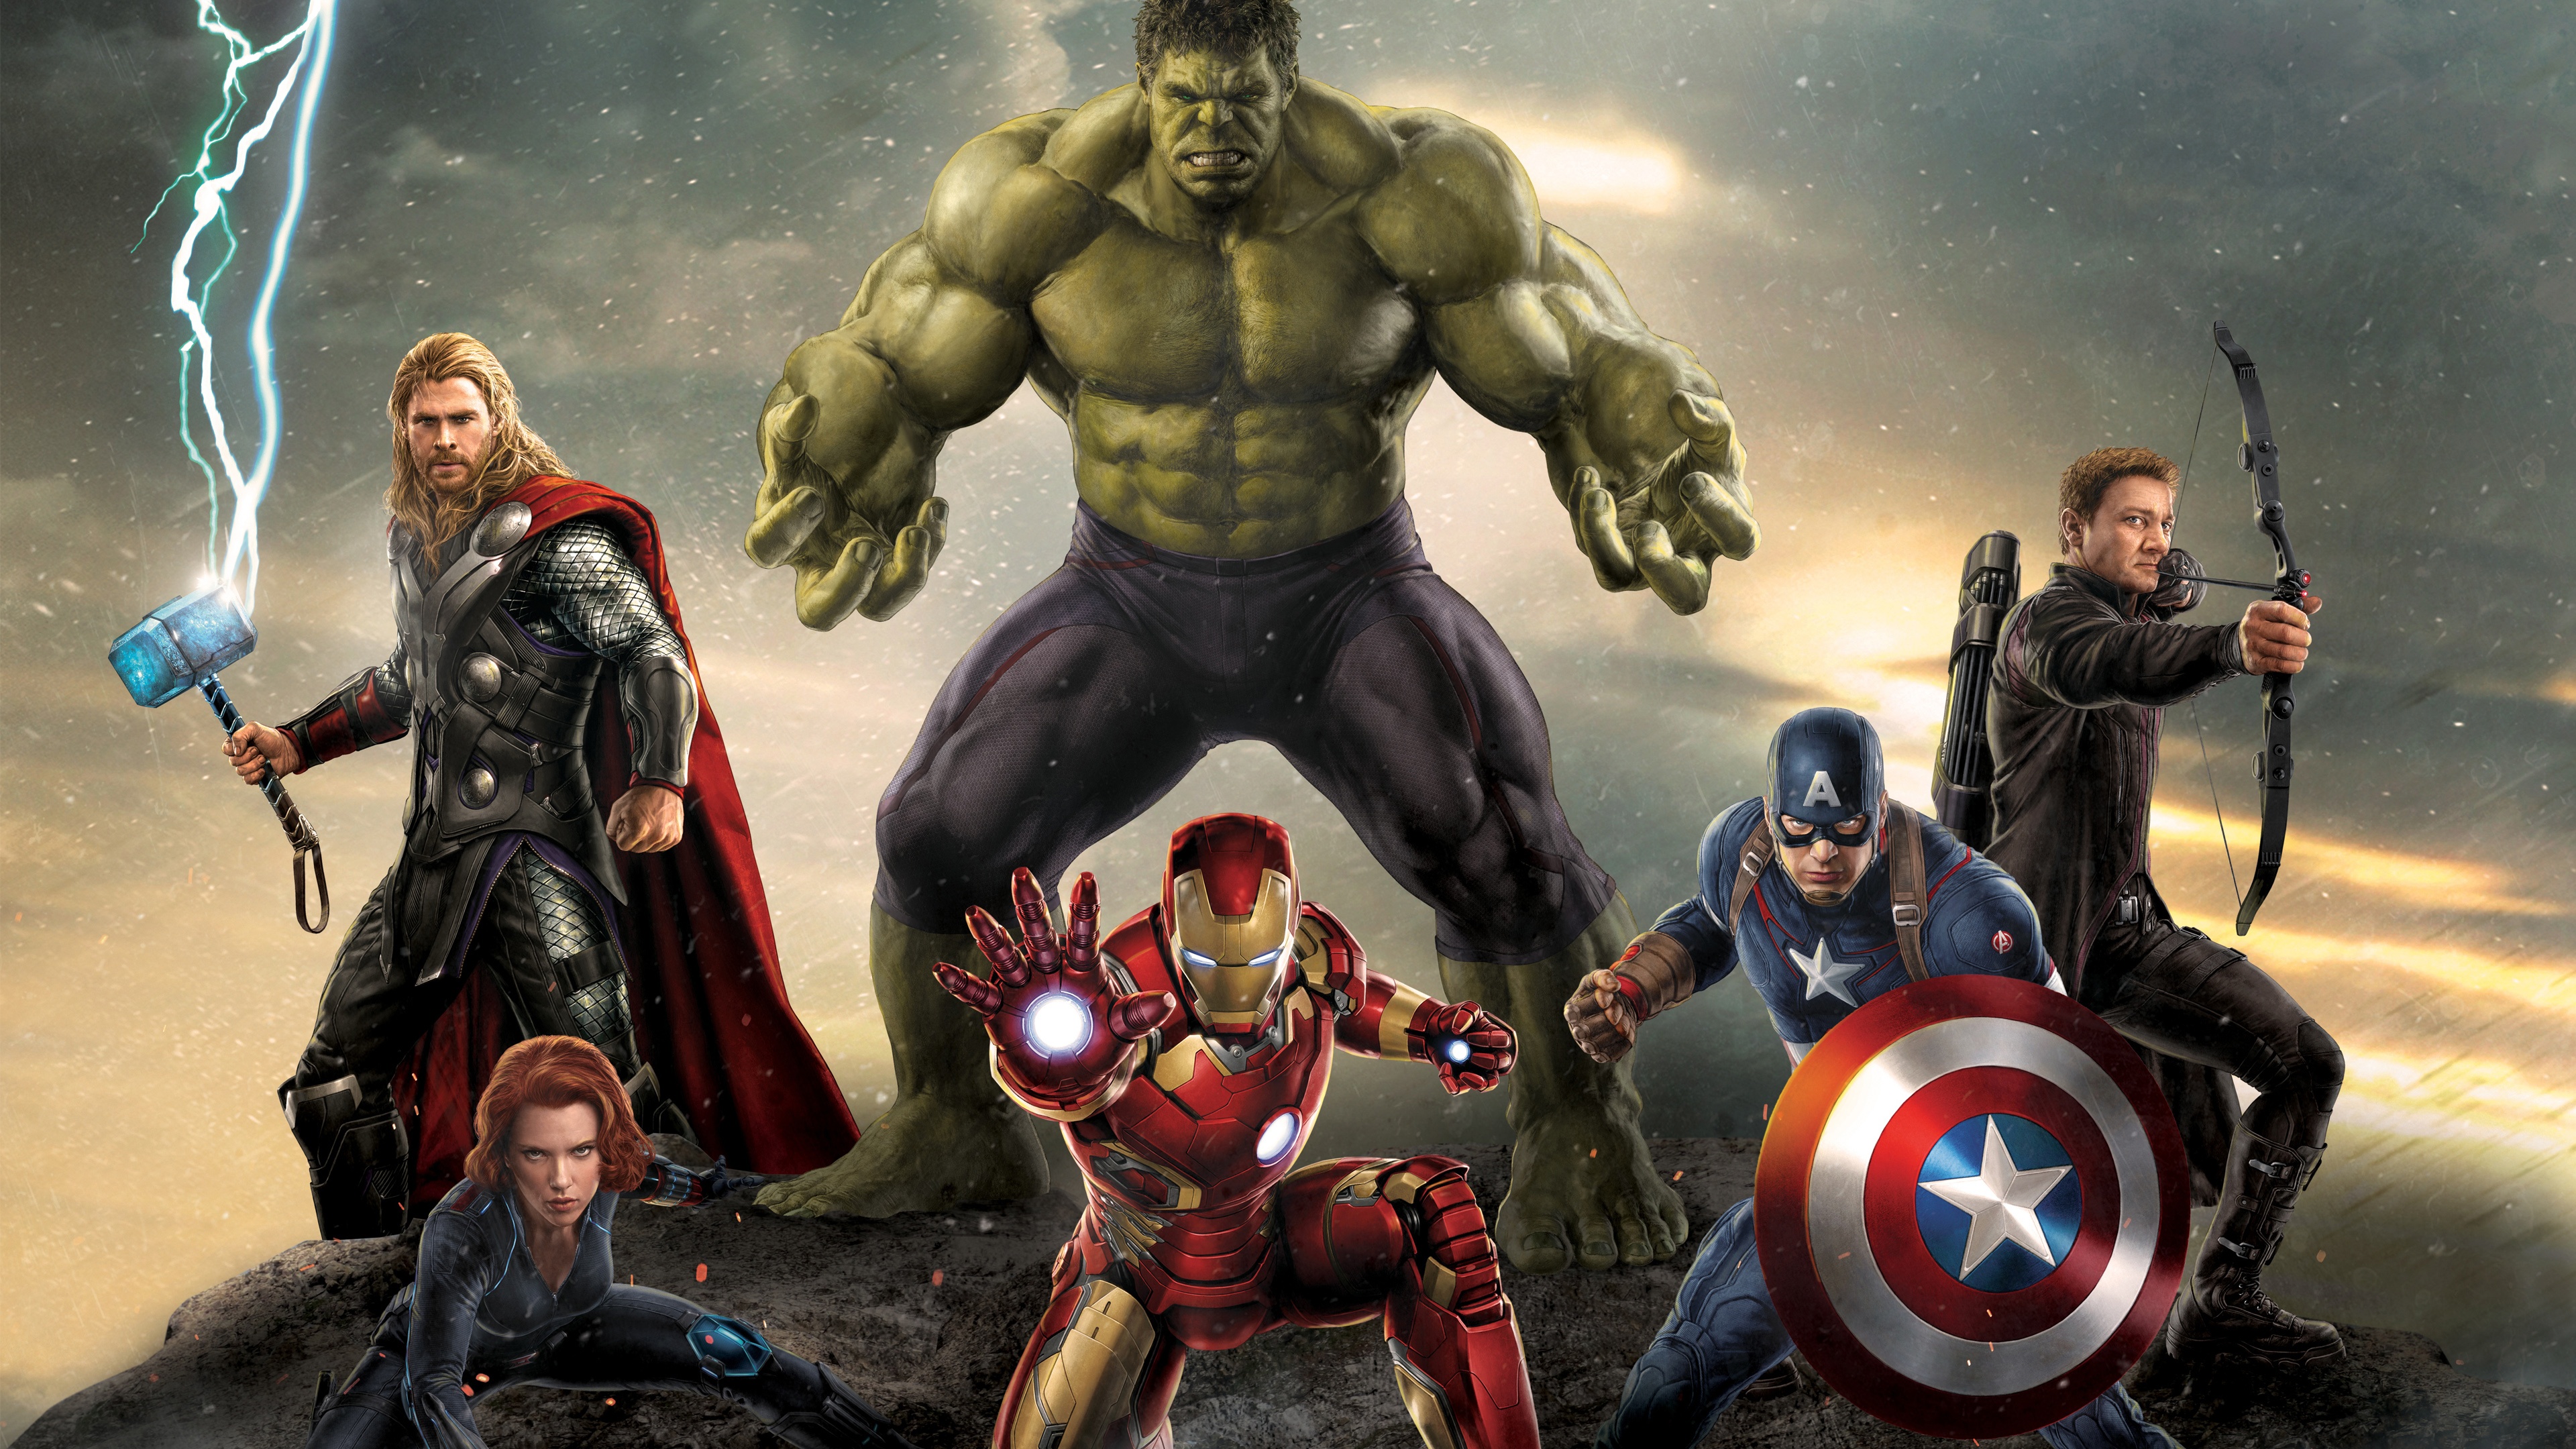 Wallpapers Tagged With AVENGERS | AVENGERS HD Wallpapers | Page 1